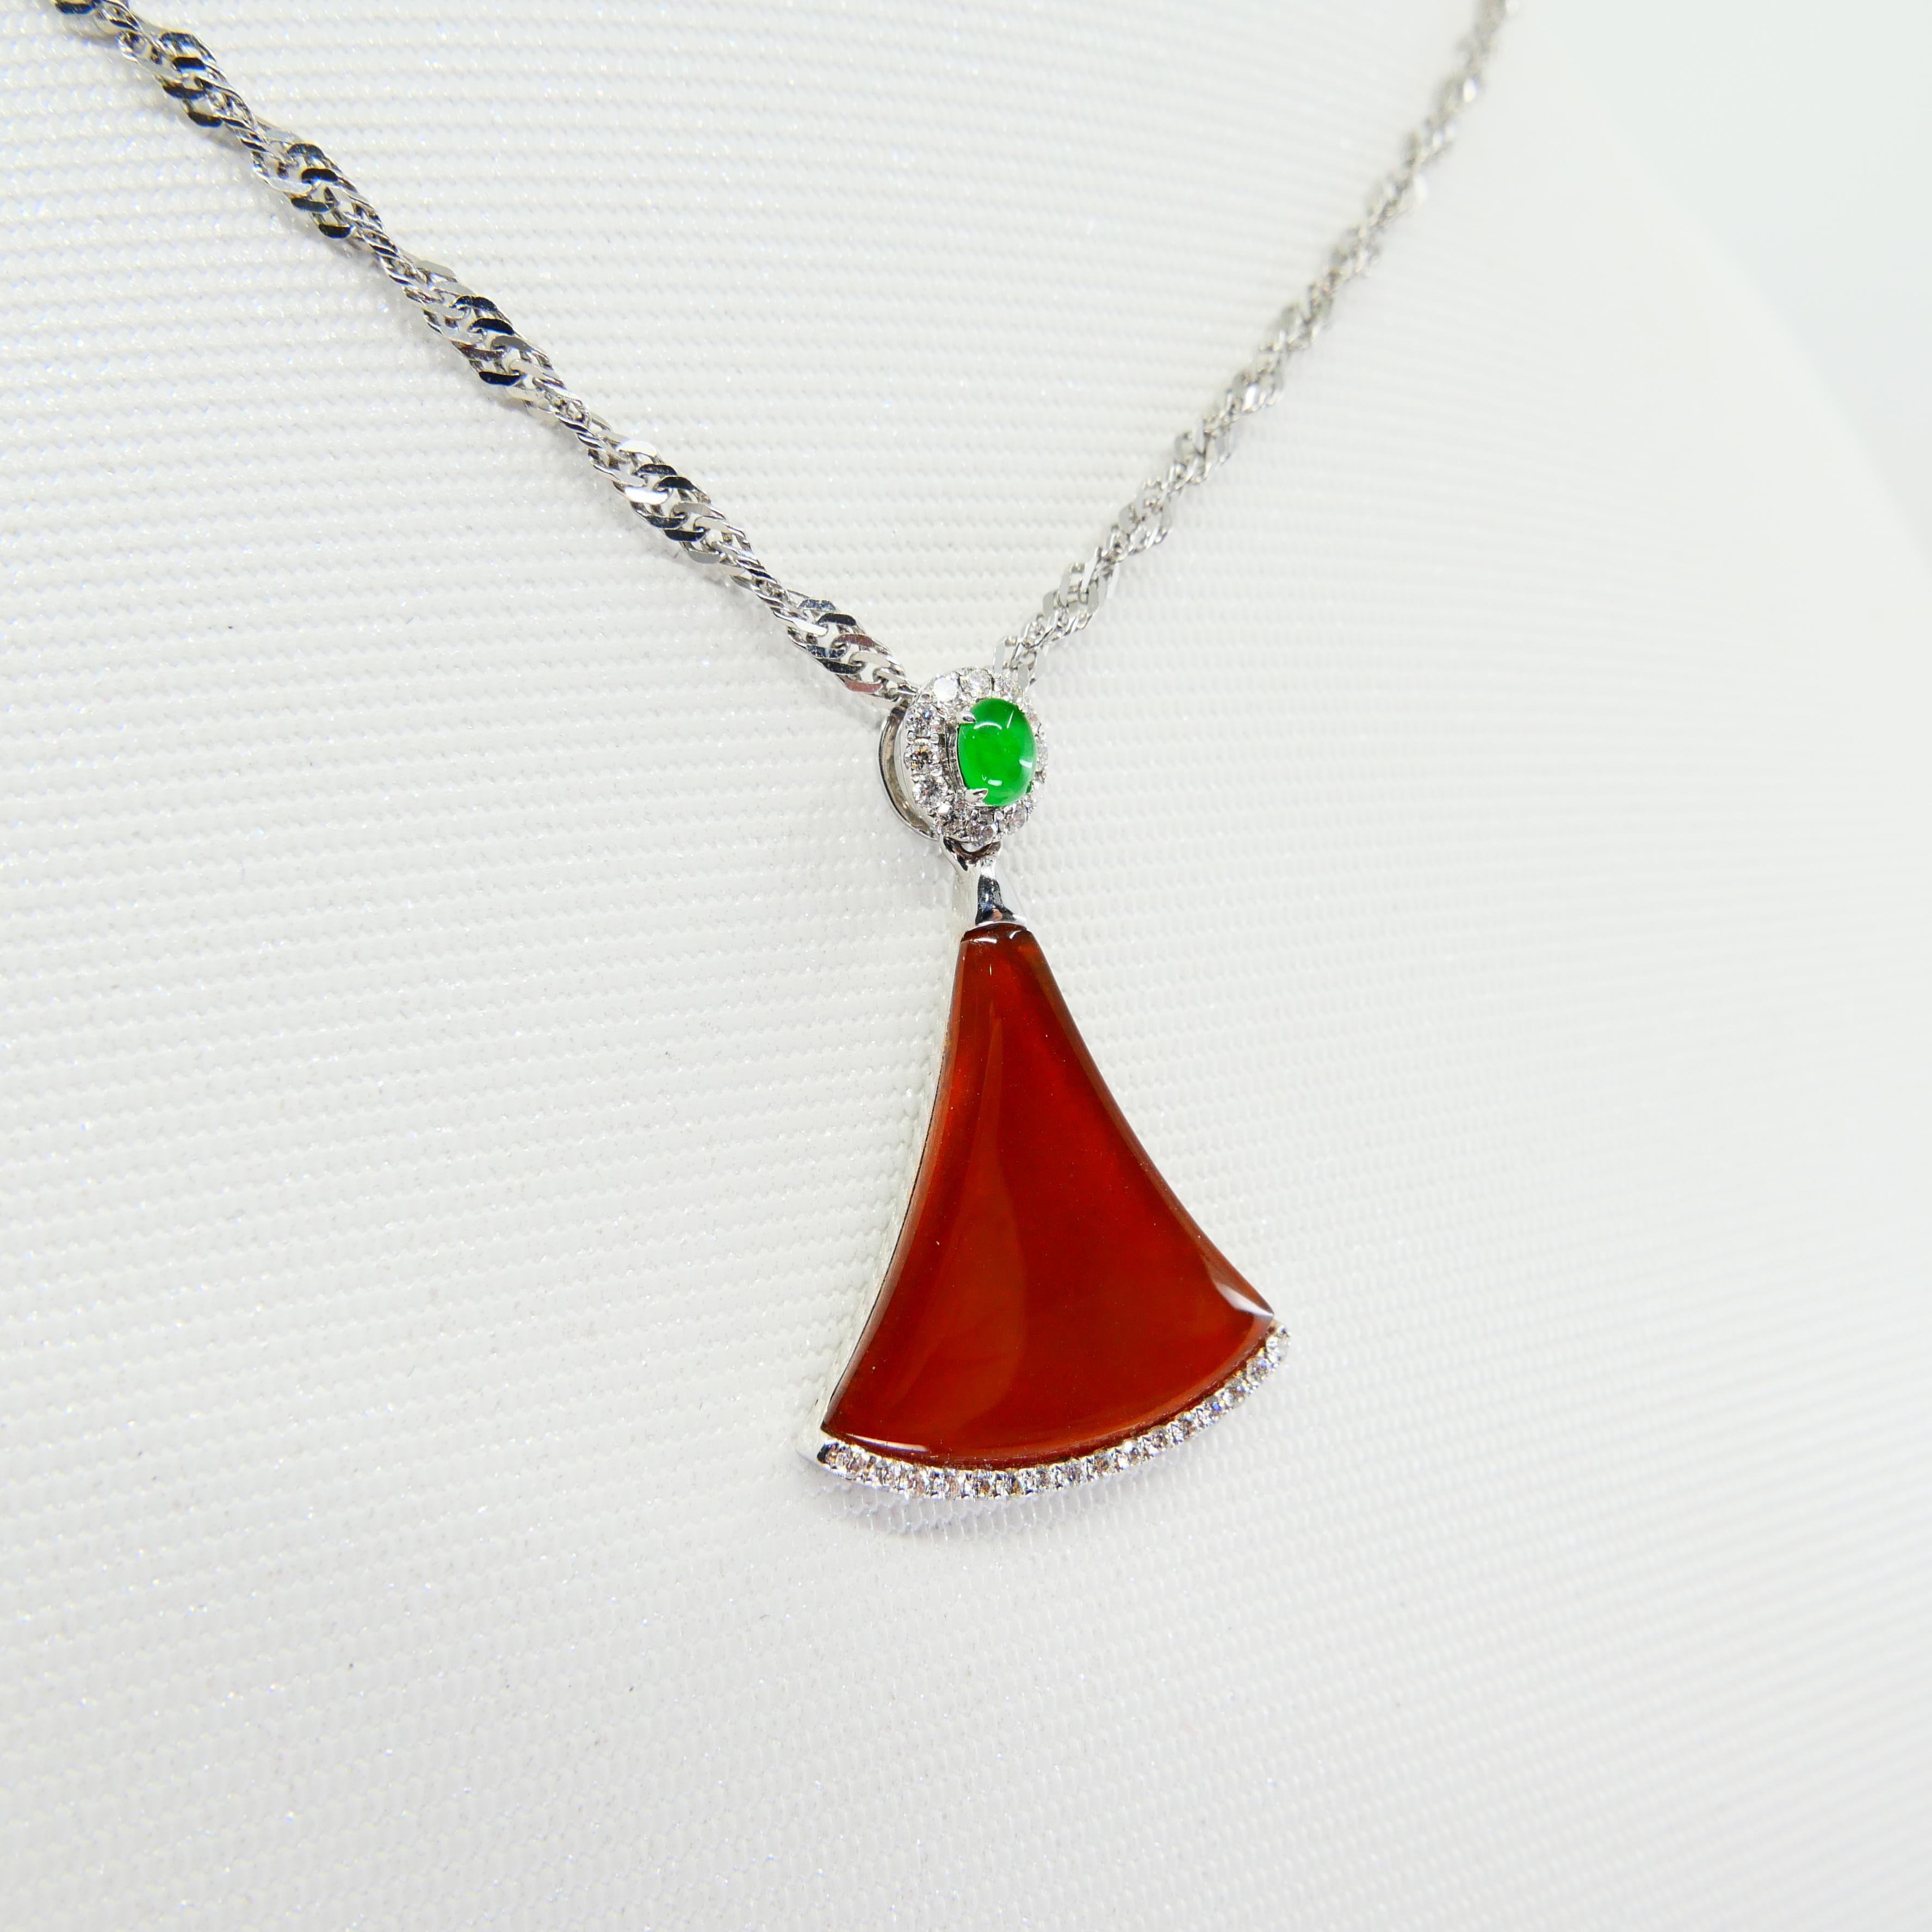 Certified Natural Icy Apple Green, Icy Red Jade & Diamond Pendant Drop Necklace 1